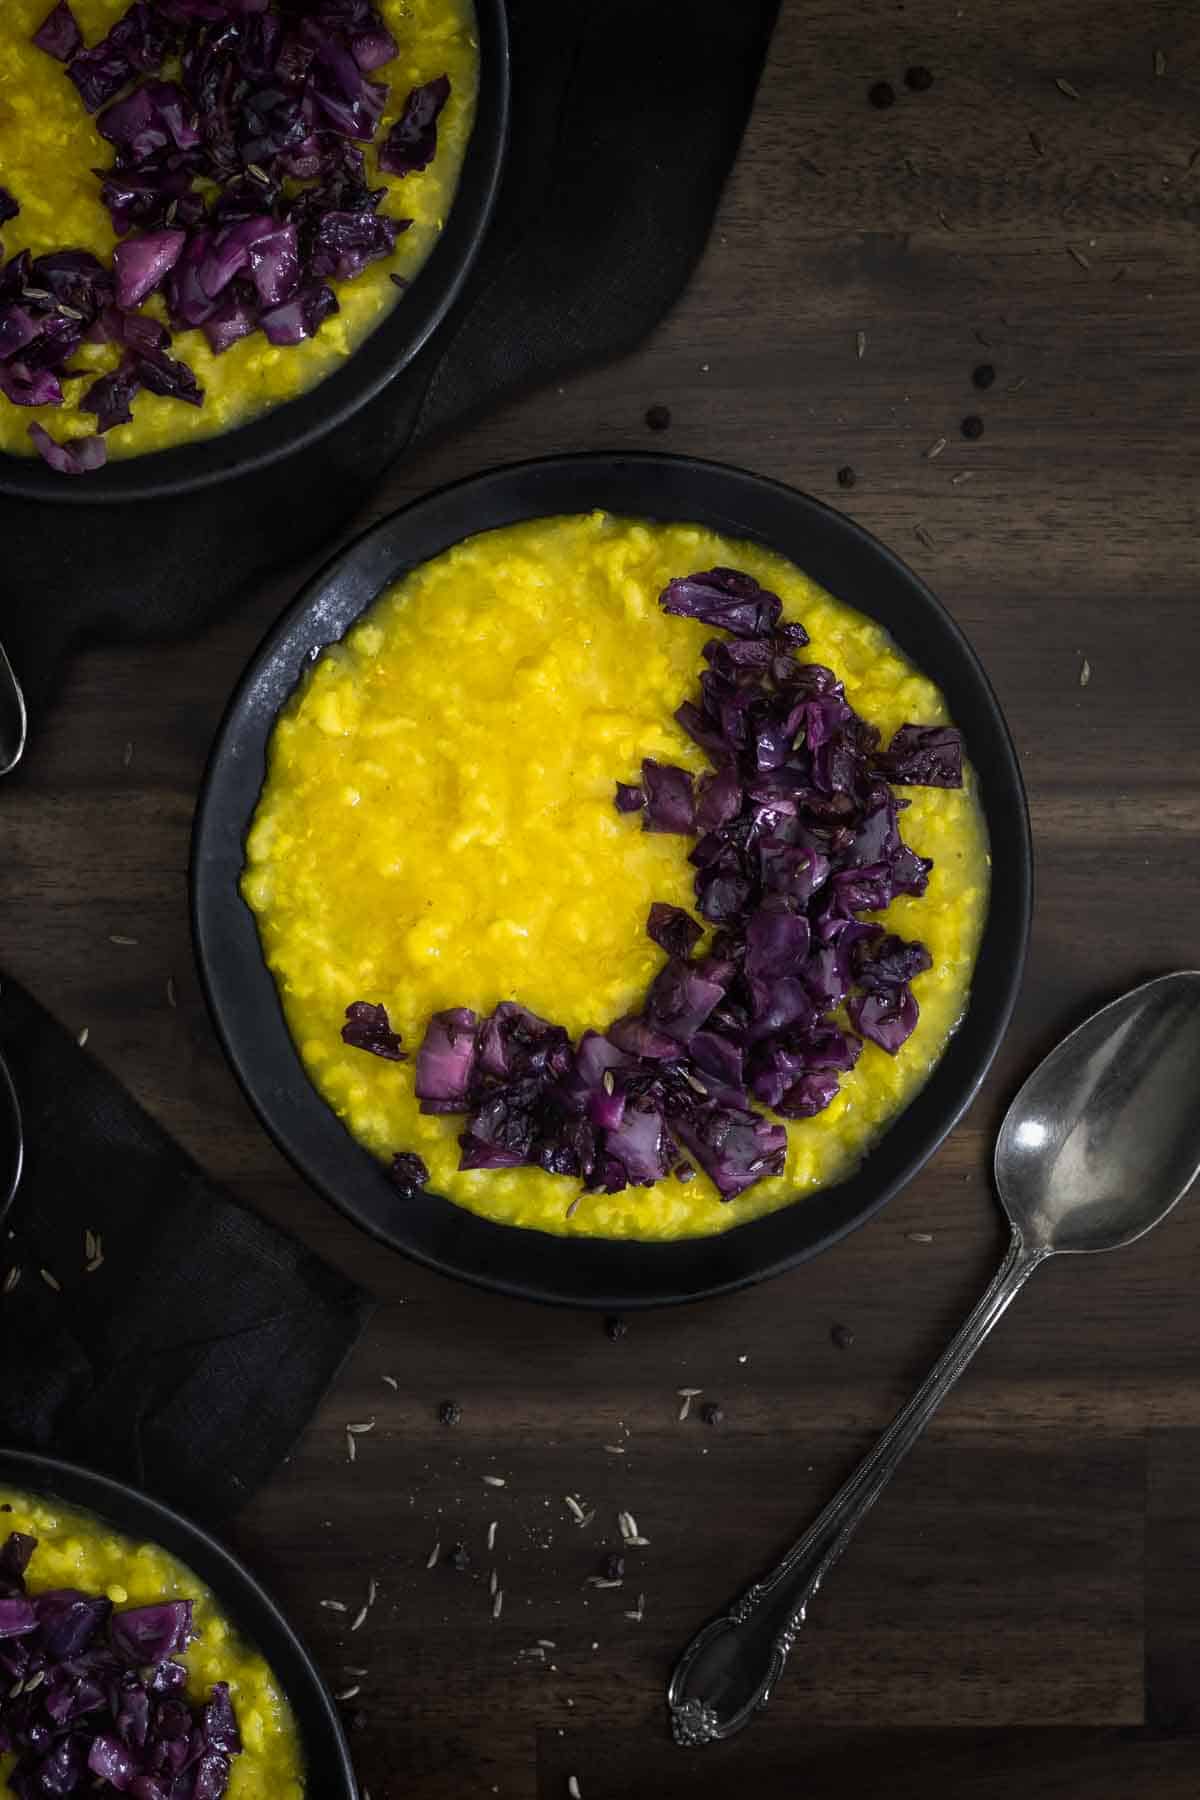 A bowl of rice and lentil porridge with red cabbage